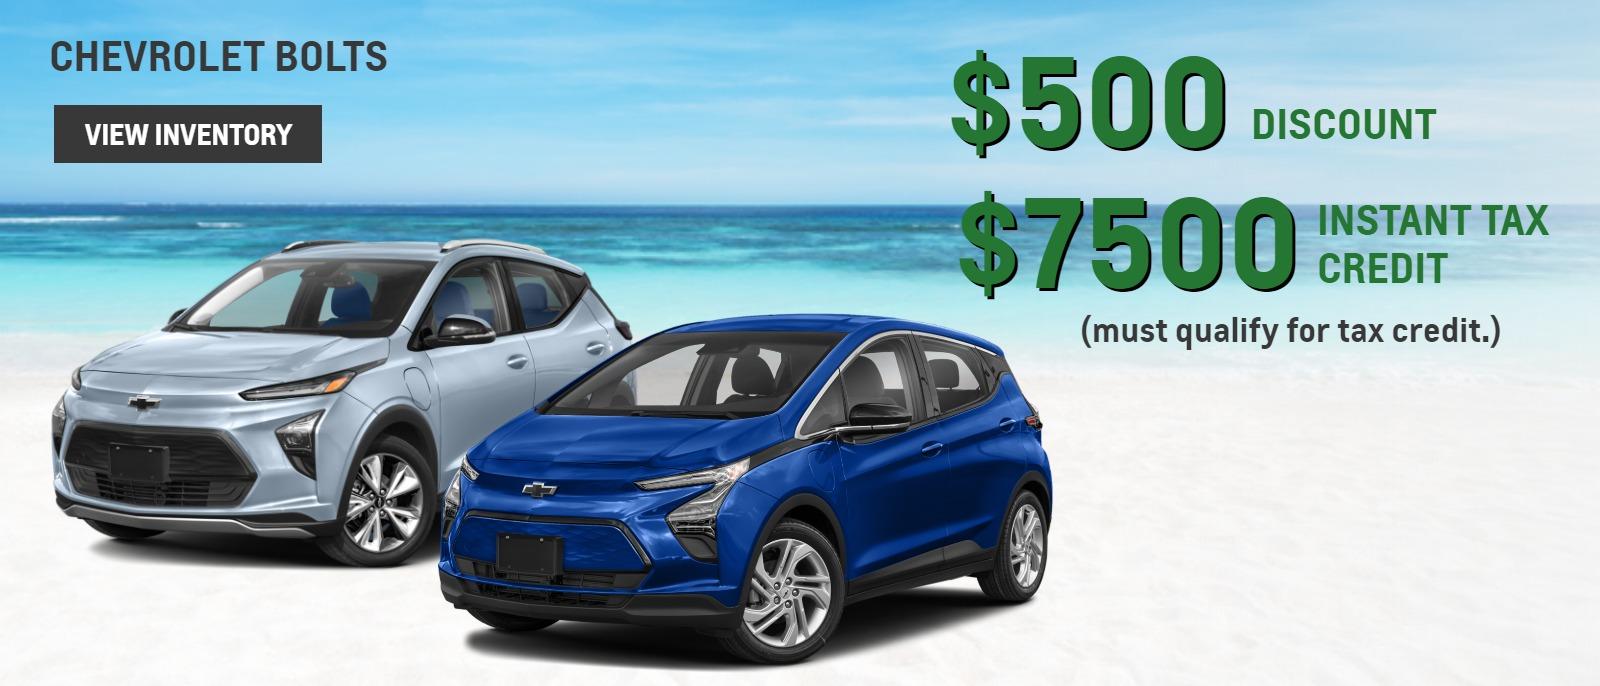 ALL BOLTS $500 DISCOUNT + $7500 INSTANT TAX CREDIT (must qualify for tax credit.)